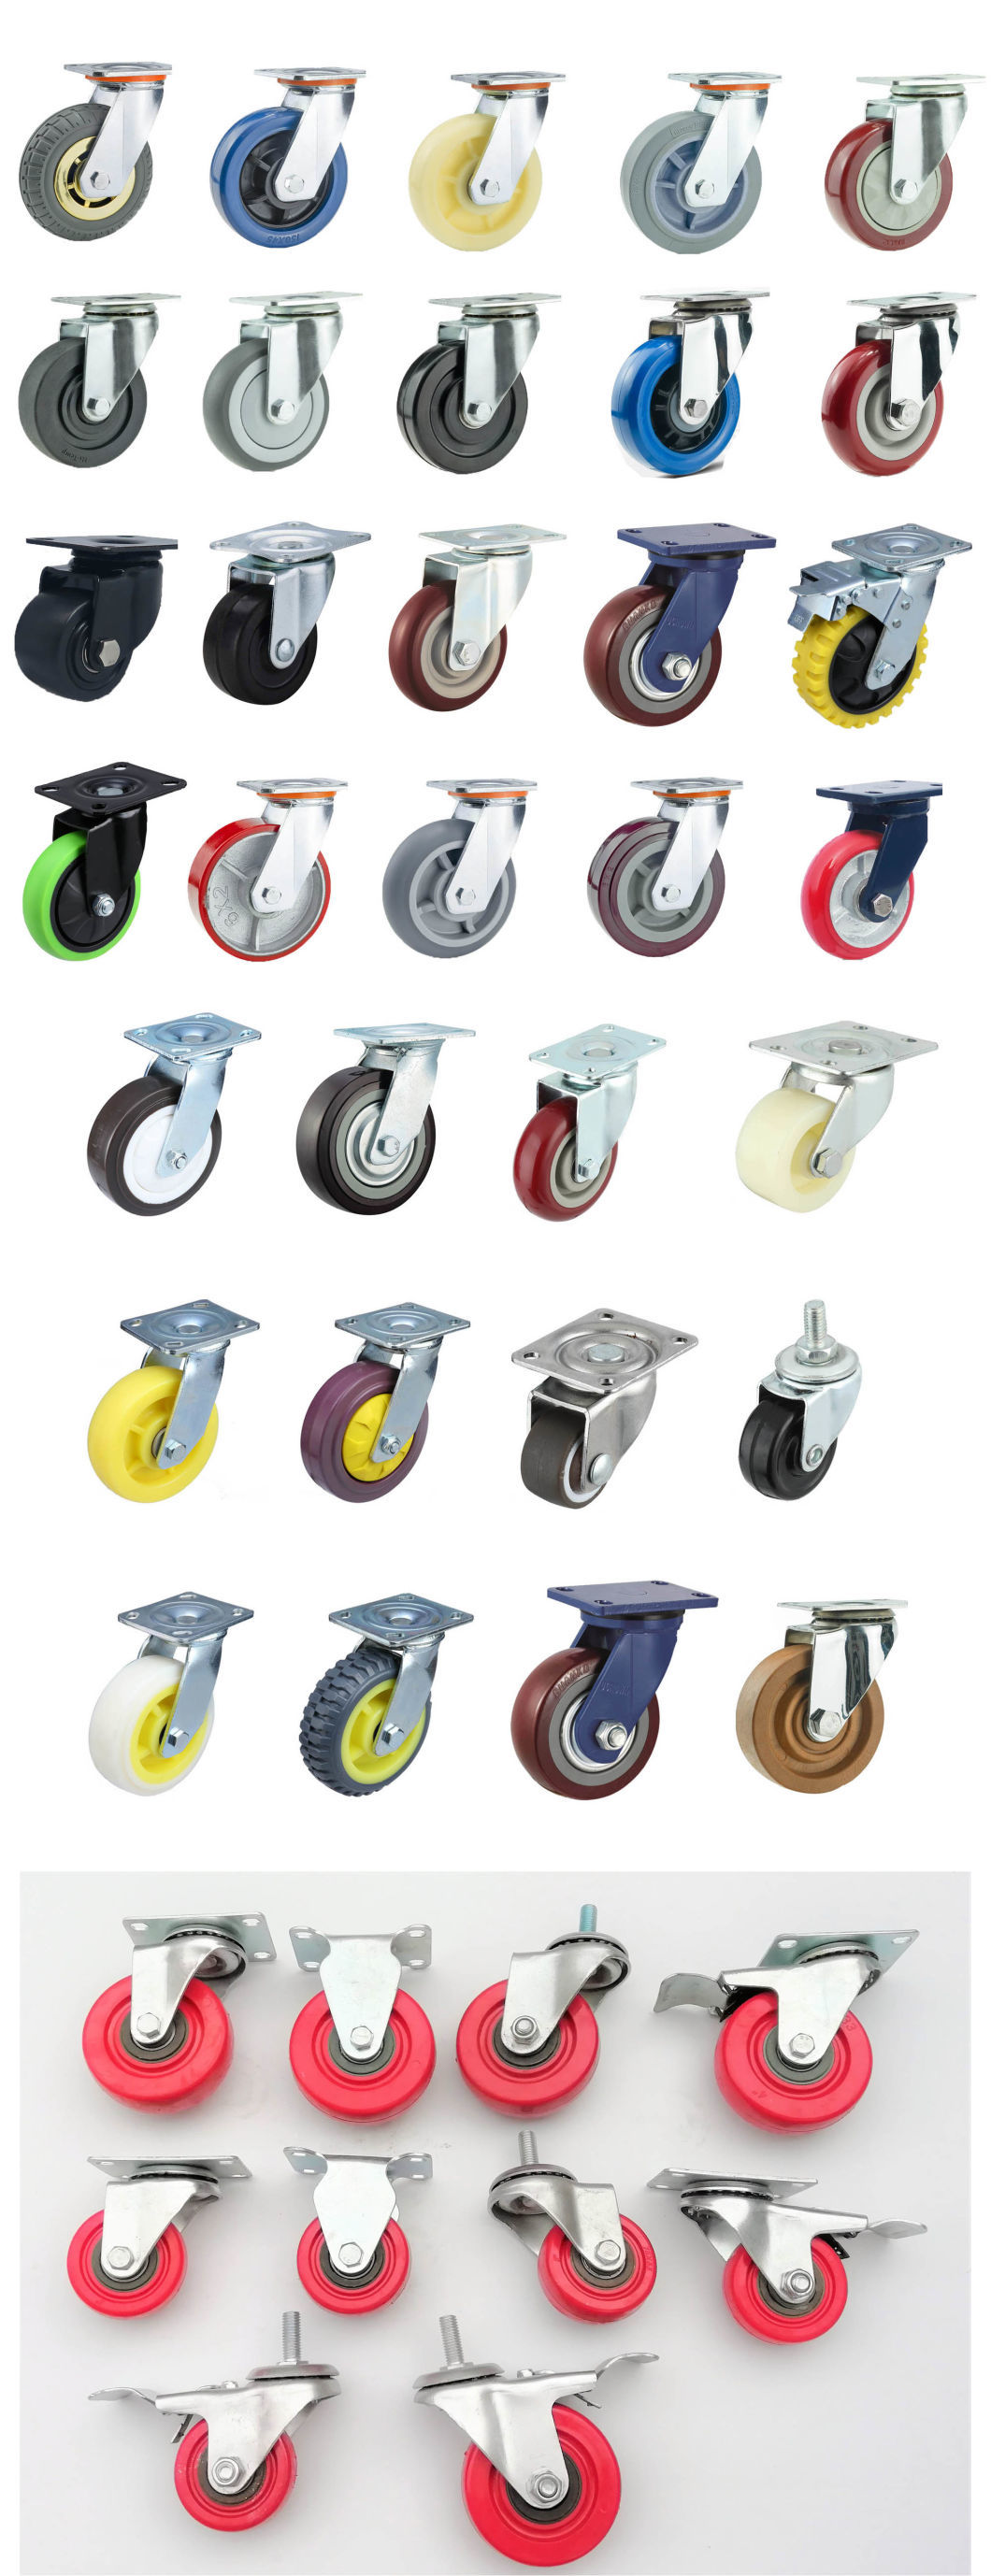 with Cover 3&quot; 4&quot; 5&quot; PVC/PU Red 3 Inches PVC/PU Wheel Casters Swivel Top Plate Threaded Stem Castor Trolley Wheels with Brake